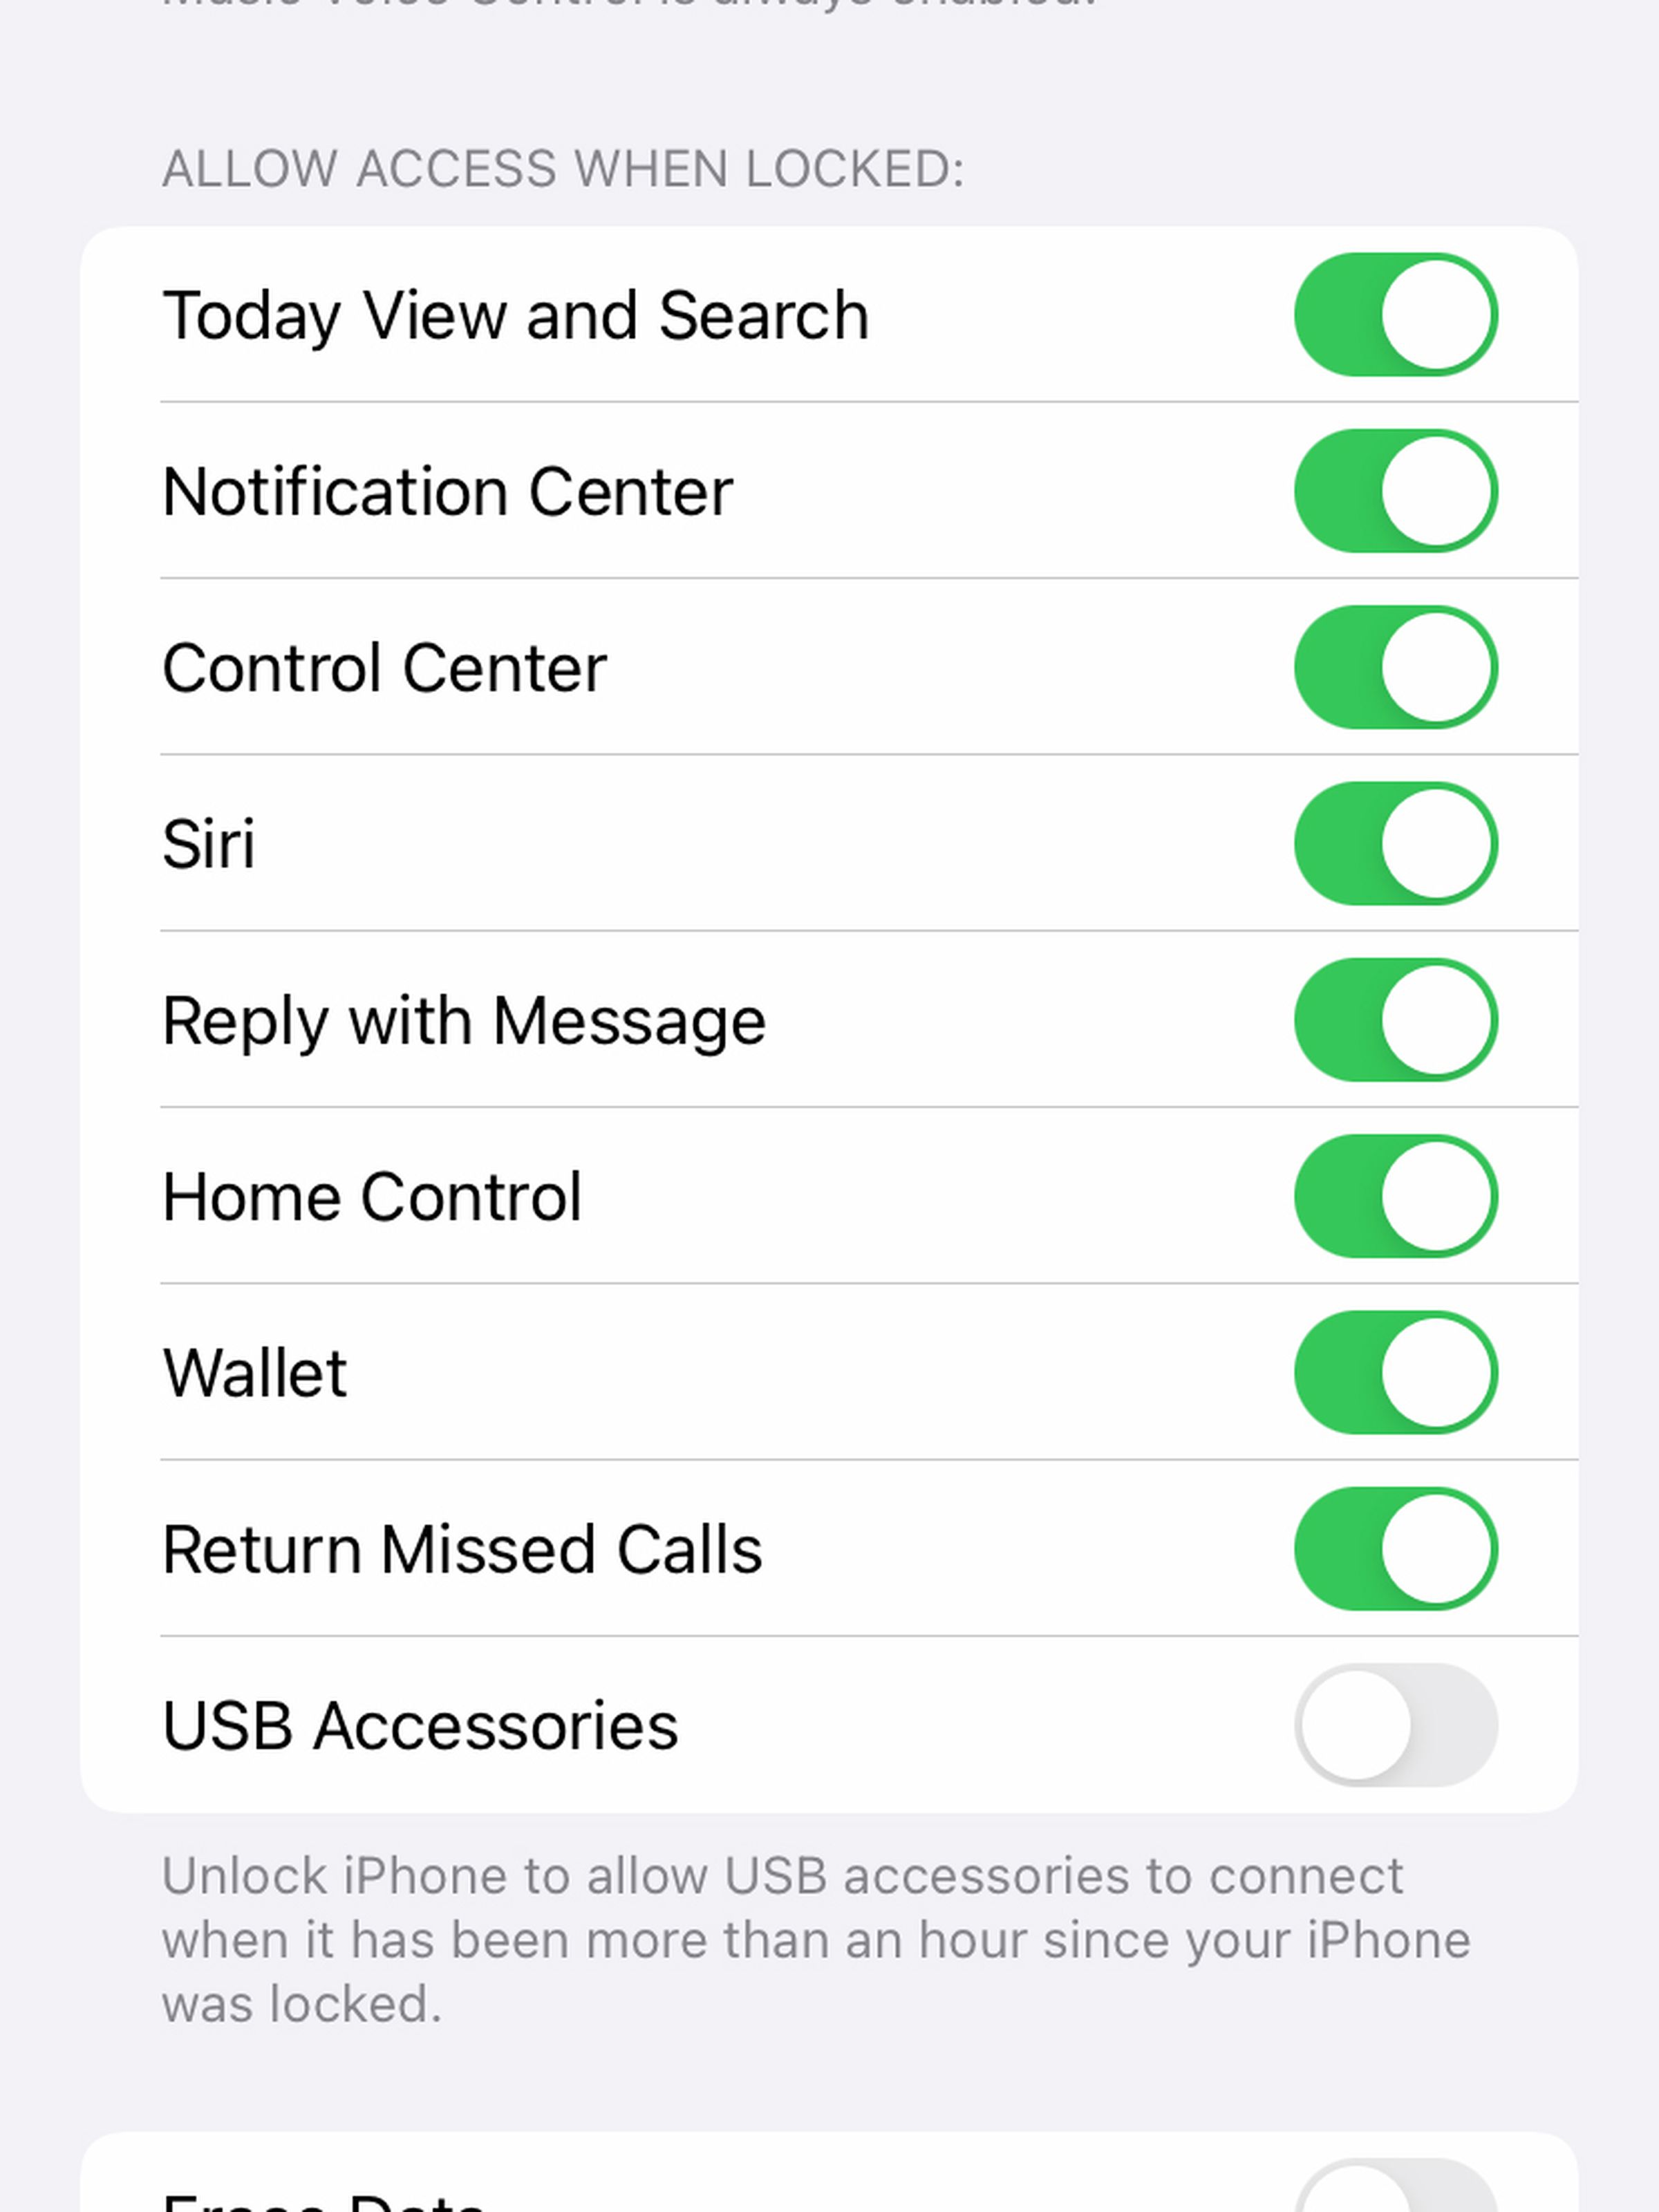 Decide which features are available to you when your phone is unlocked.